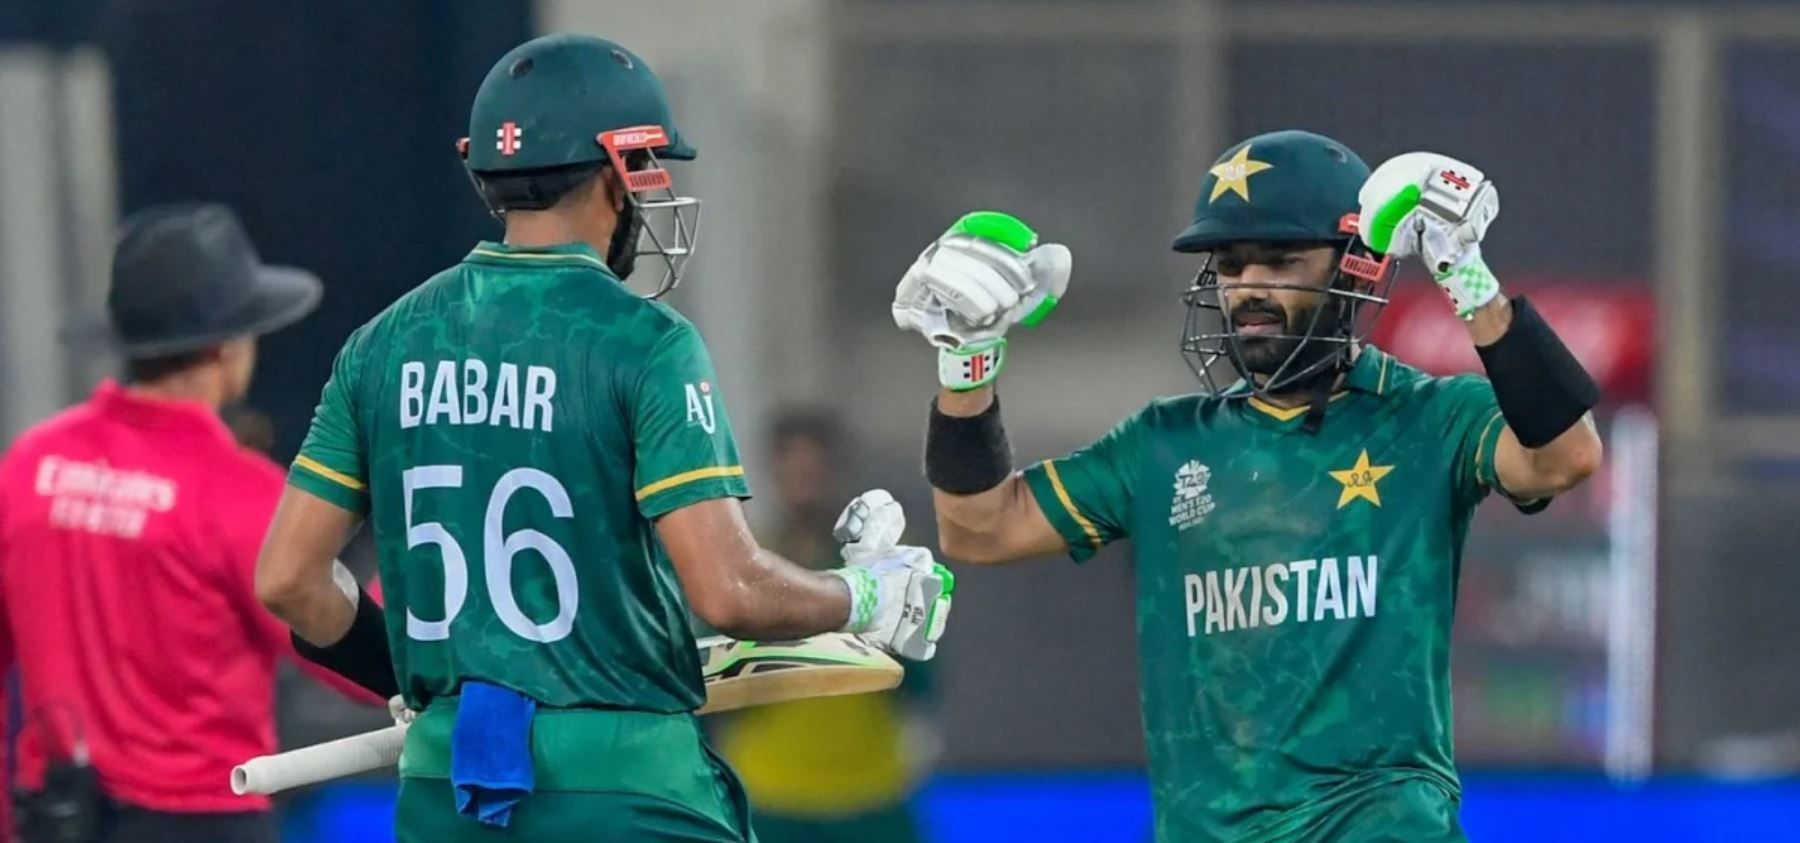 Babar and Rizwan got Pakistan off to a flying start at the T20 World Cup